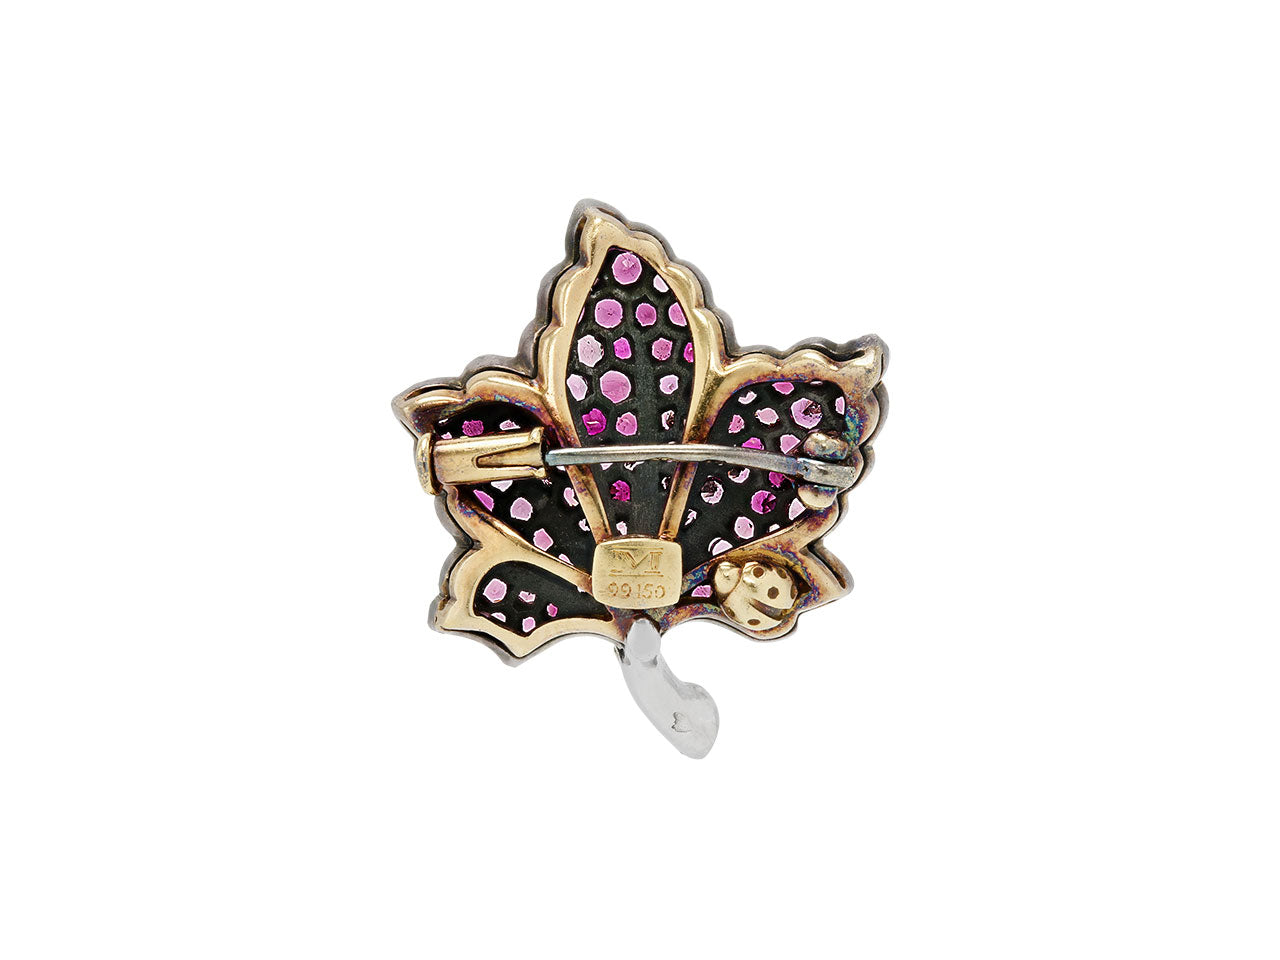 Martin Katz Small Pink Sapphire and Diamond Leaf Brooch in 18K Gold, Small